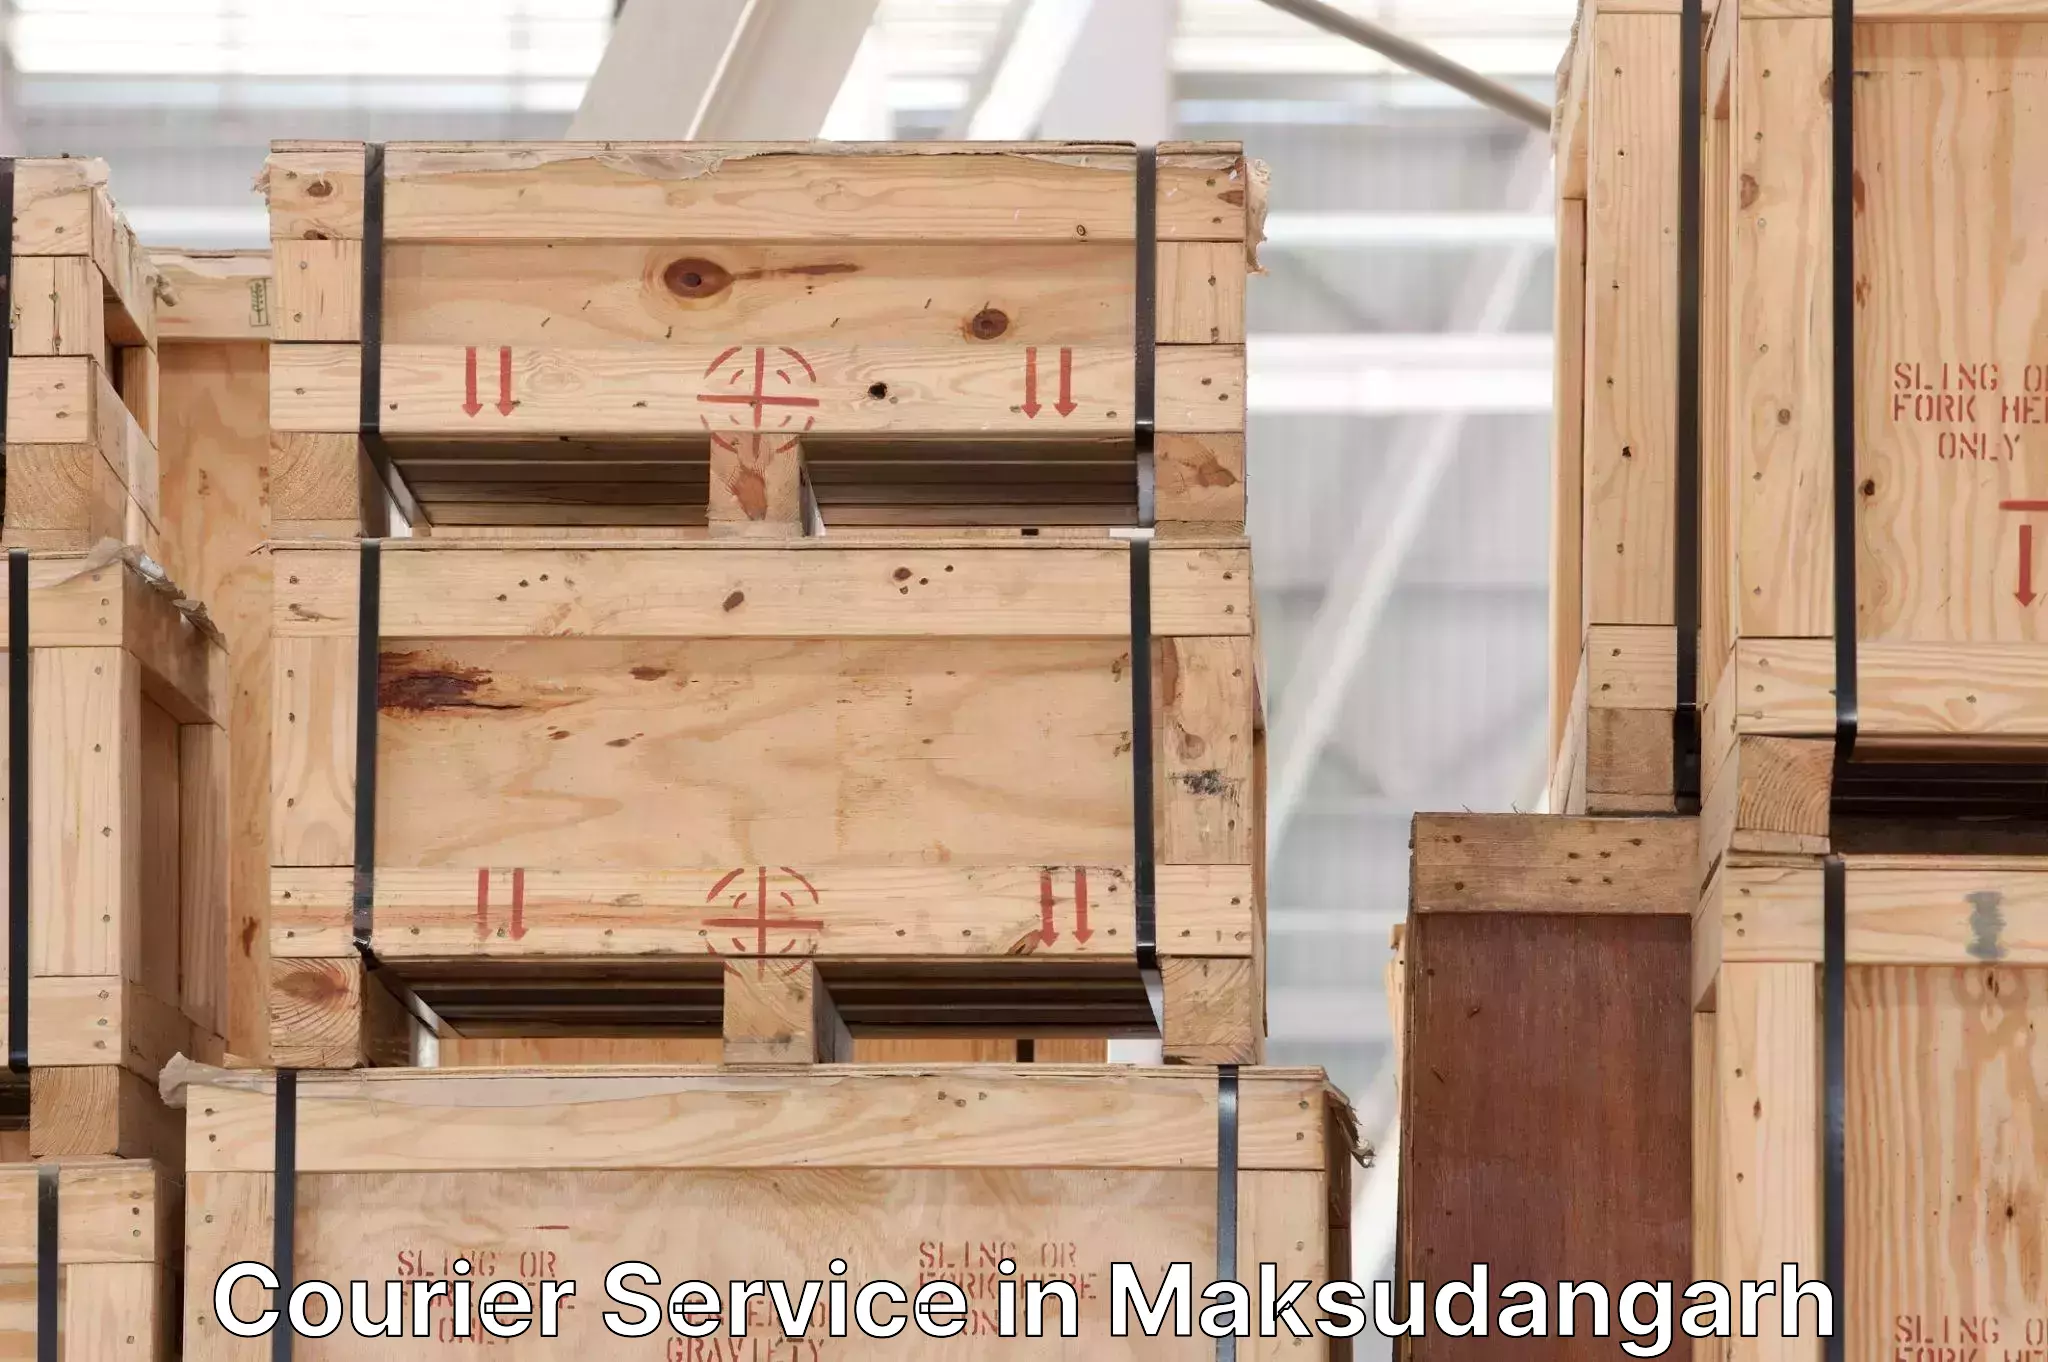 Advanced freight services in Maksudangarh